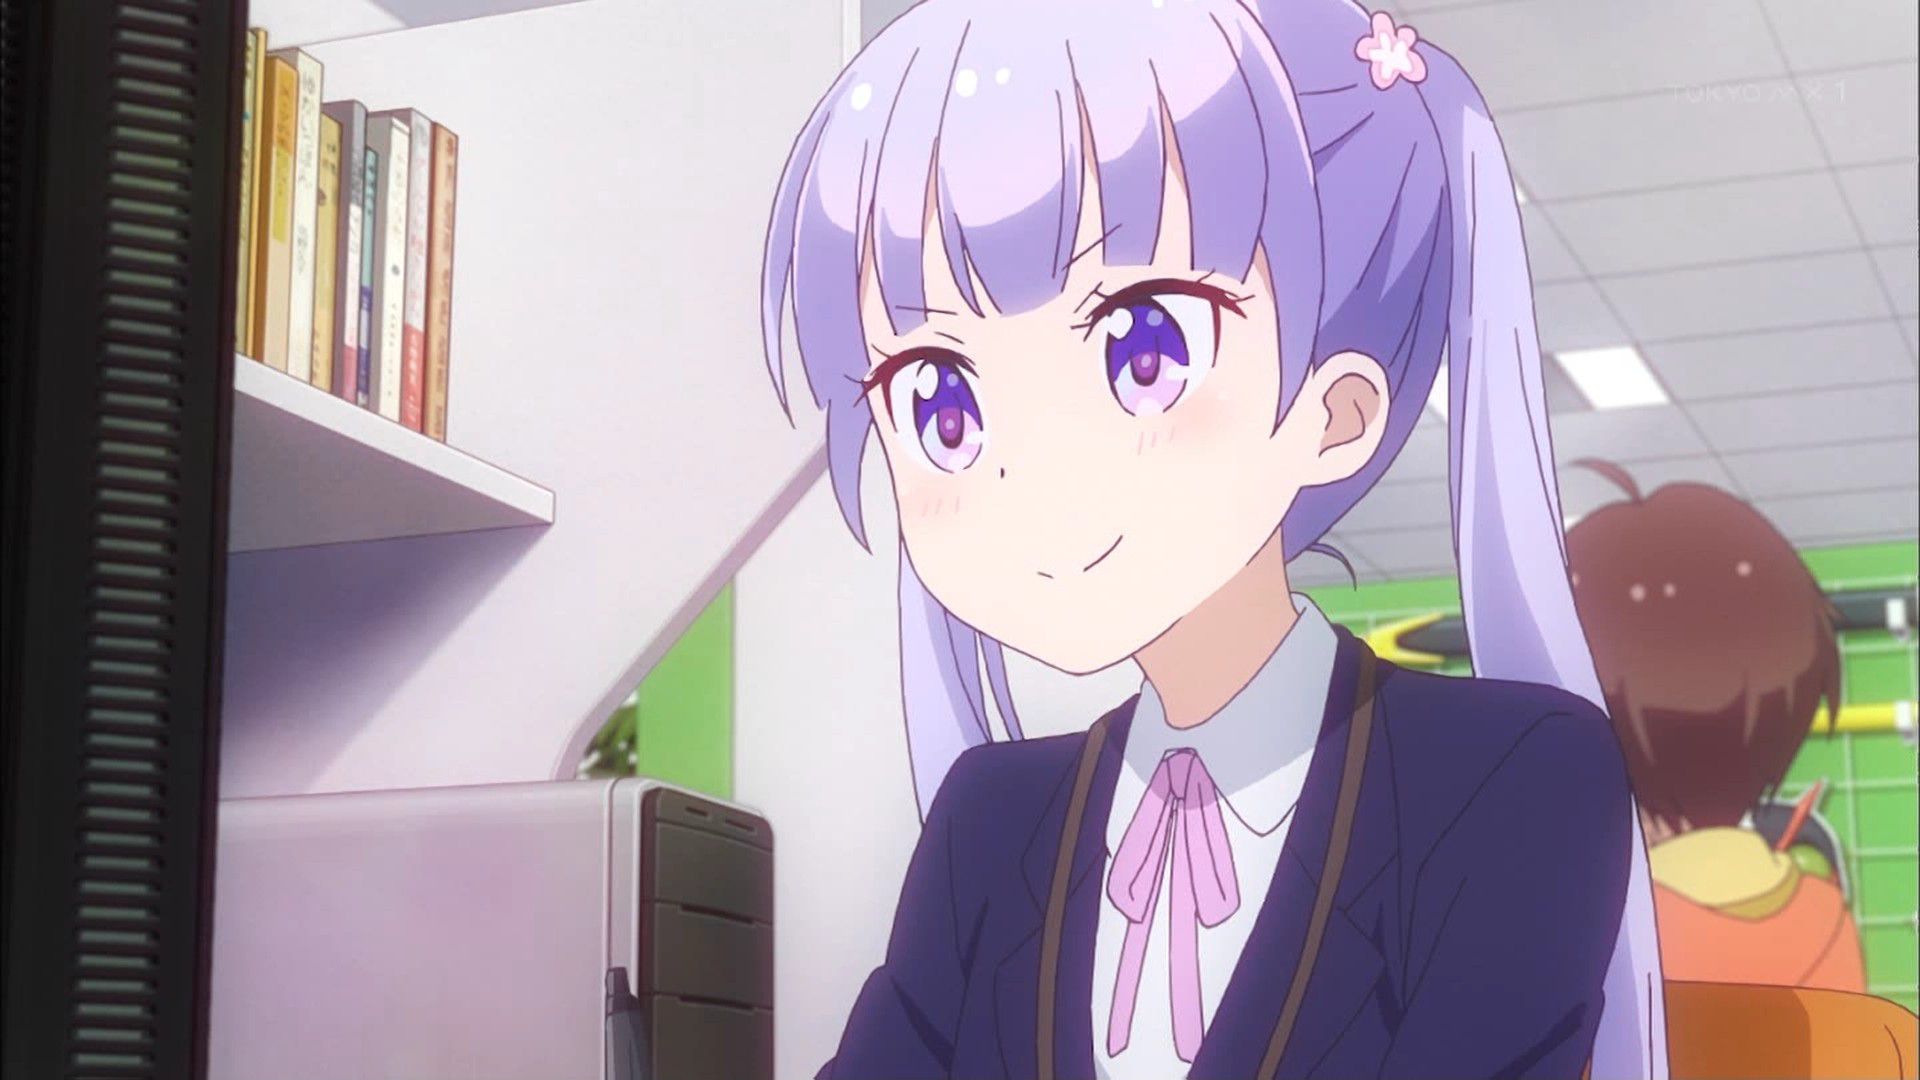 NEW GAME!! 6 episodes this week it's great. 10